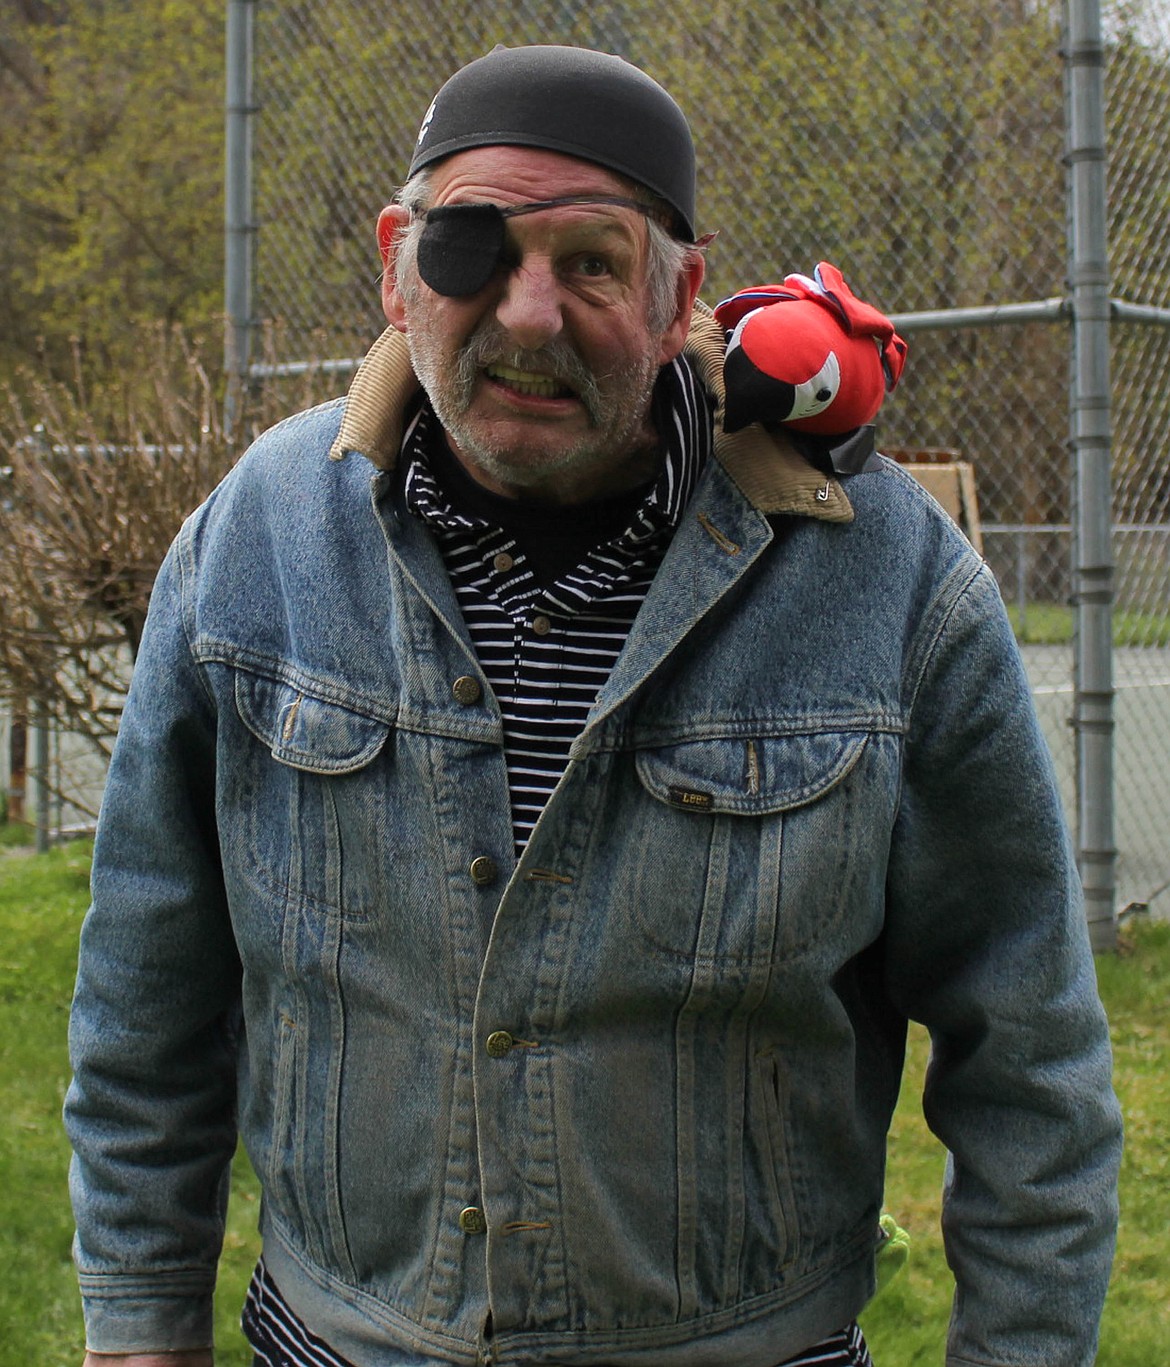 PIRATE DON Pickering at the Walk for the Plank fundraiser in Superior on Sunday, April 28.